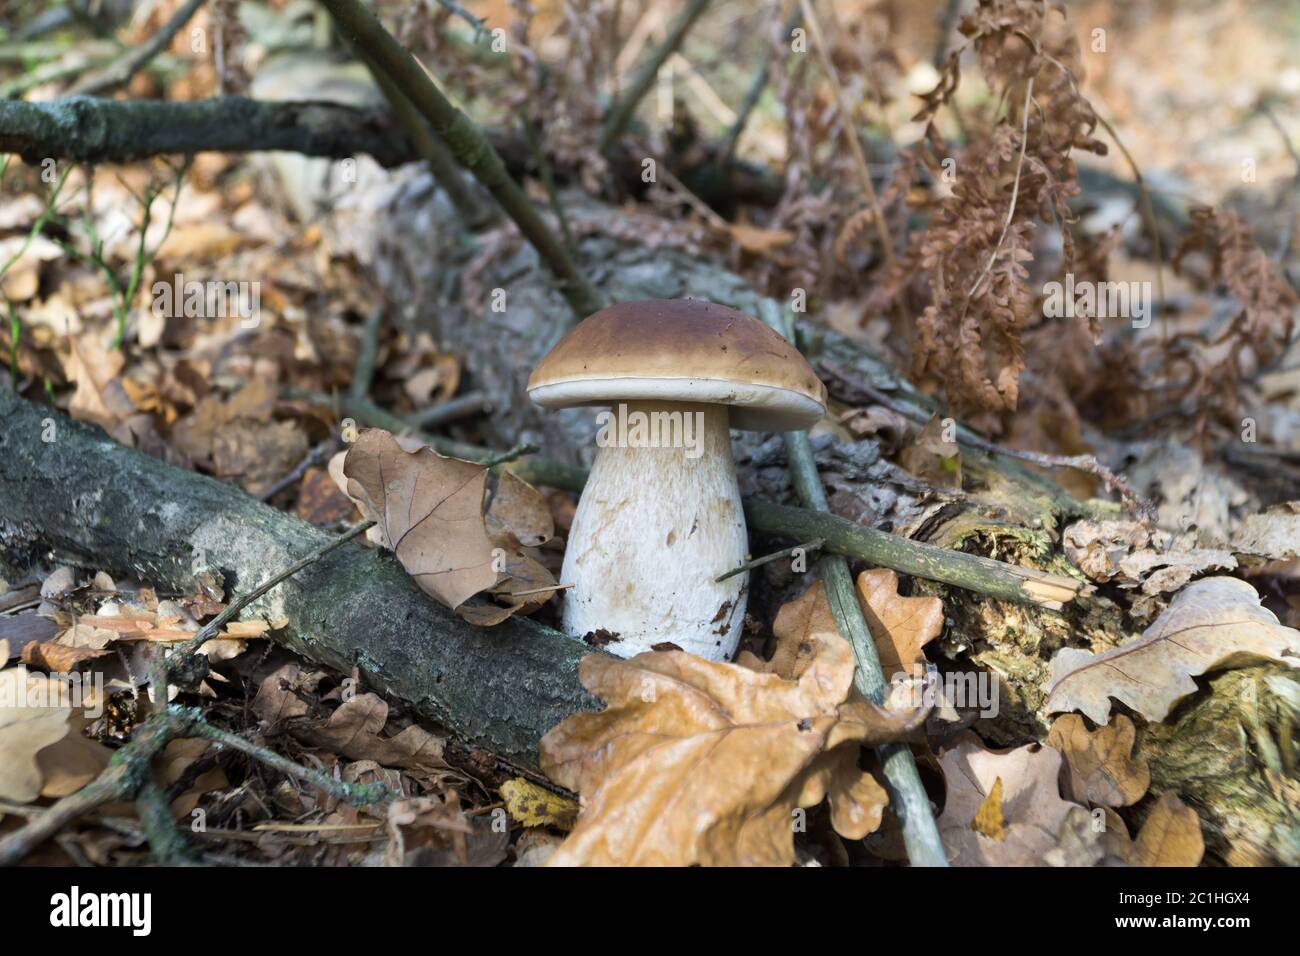 Wild mushroom (Boletus) growing in natural forest in autumn. Selective focus. Stock Photo